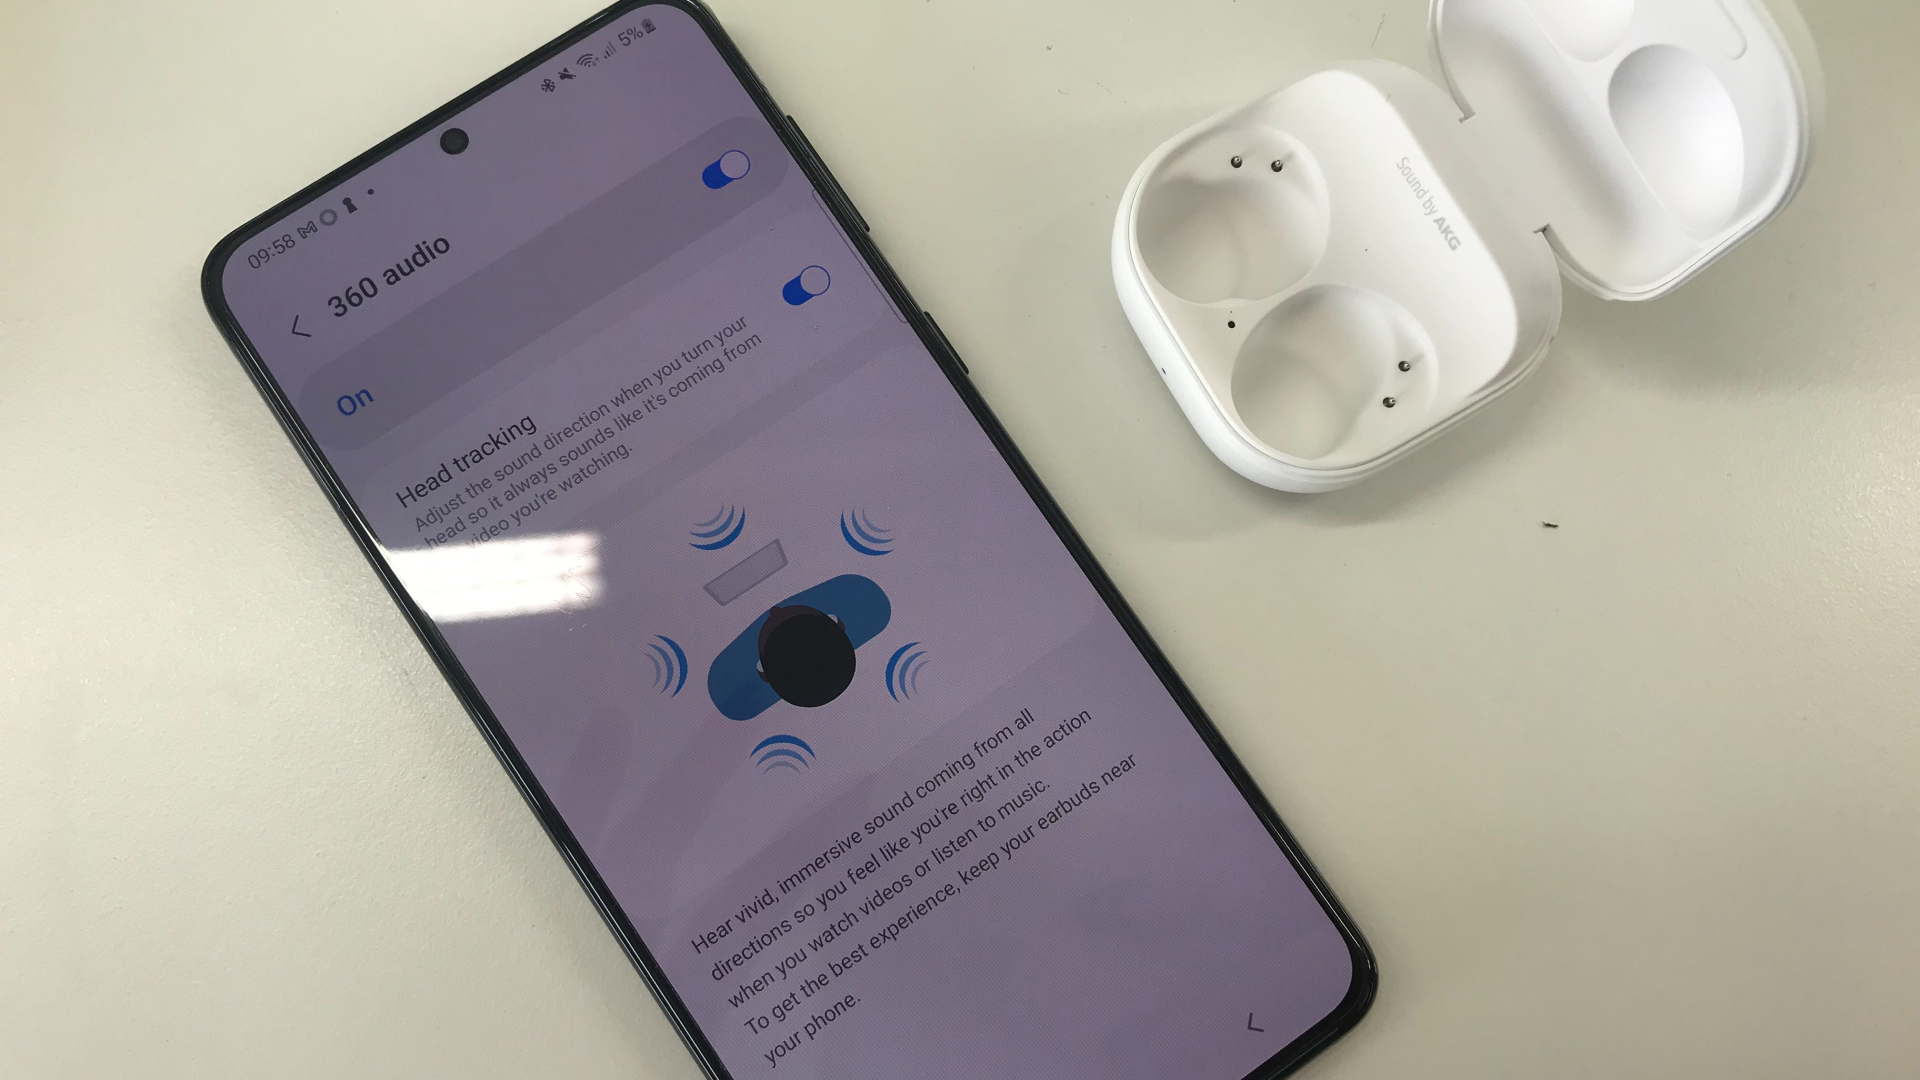 Samsung Galaxy Buds 2 Pro and a phone showing the Samsung Wearable app